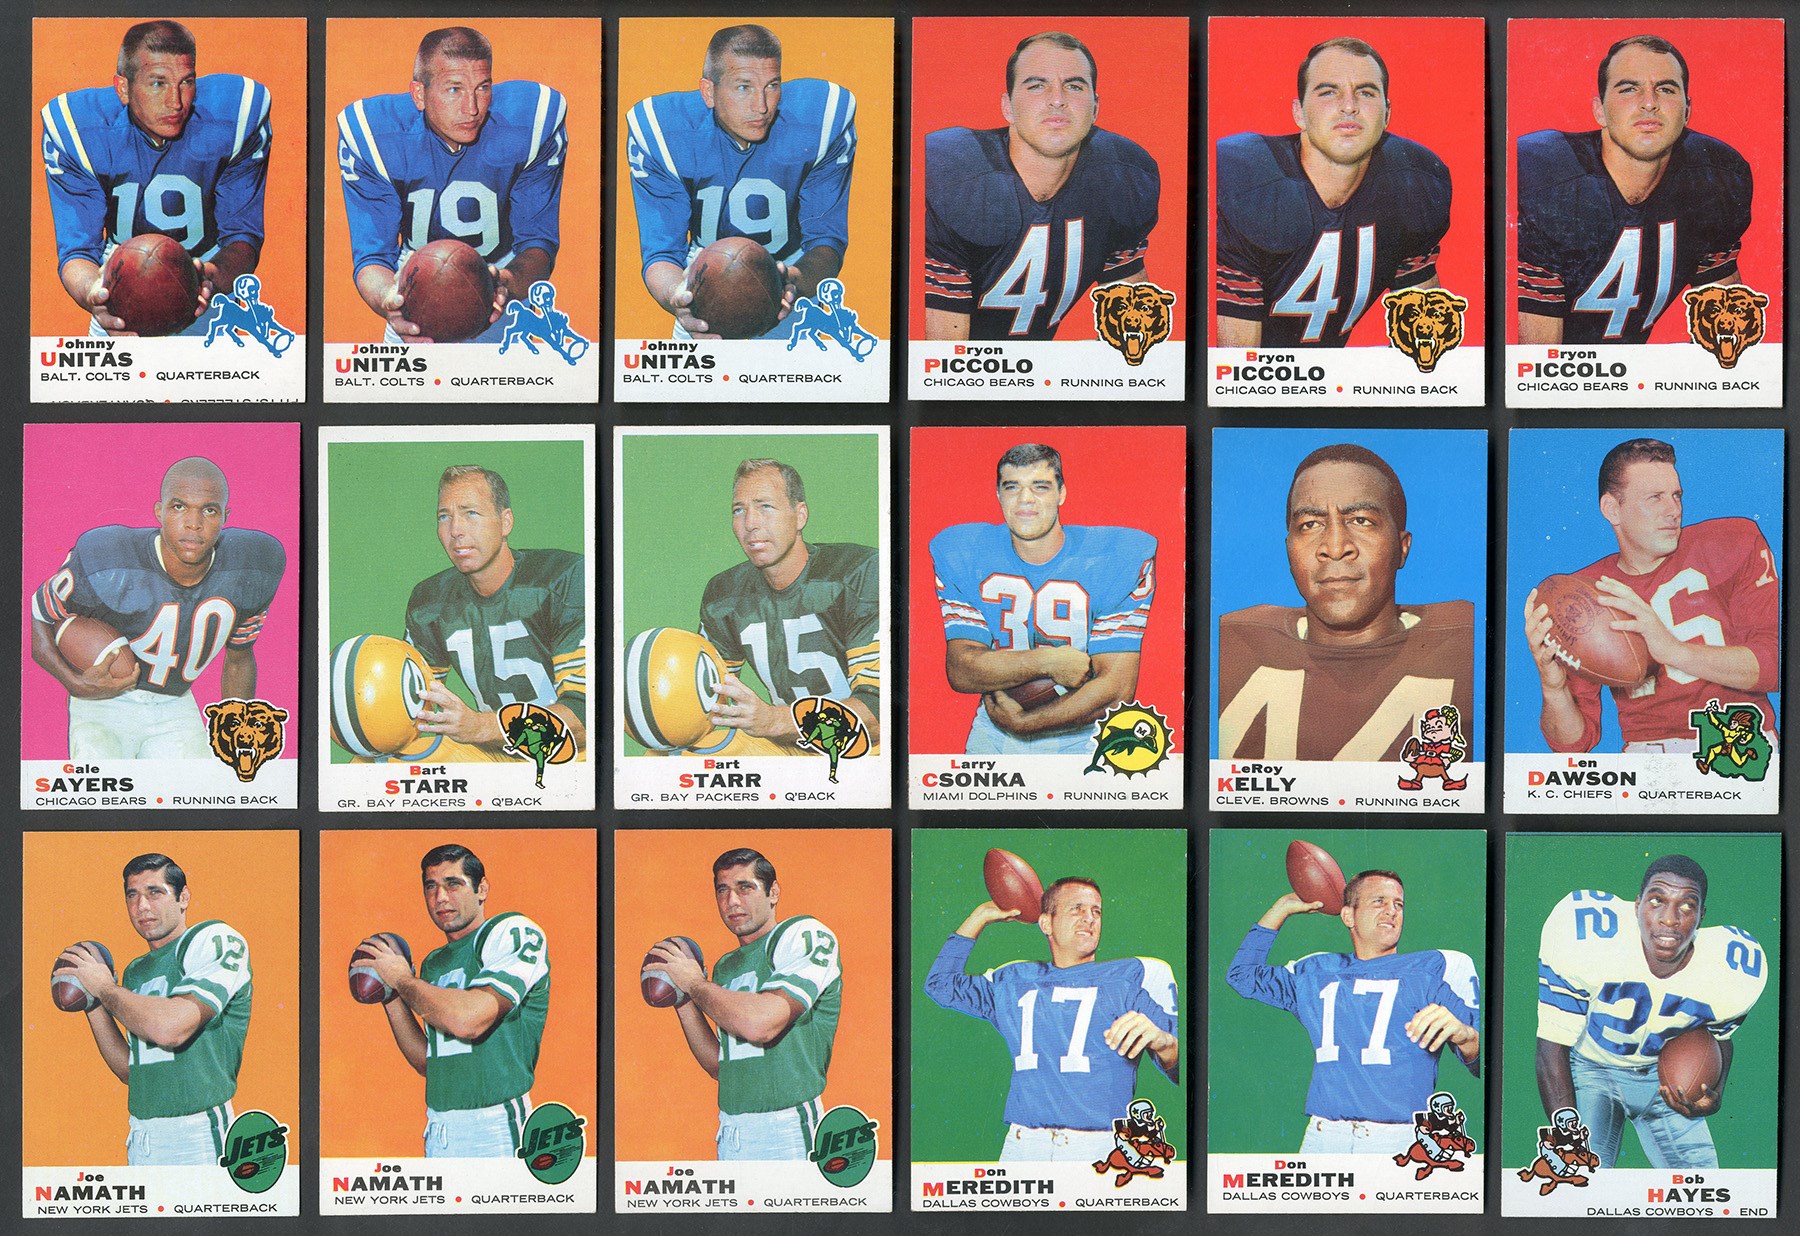 Baseball and Trading Cards - 1968-74 Topps Vending Quality Football Card Collection of over 1,700 Cards with Major Stars!